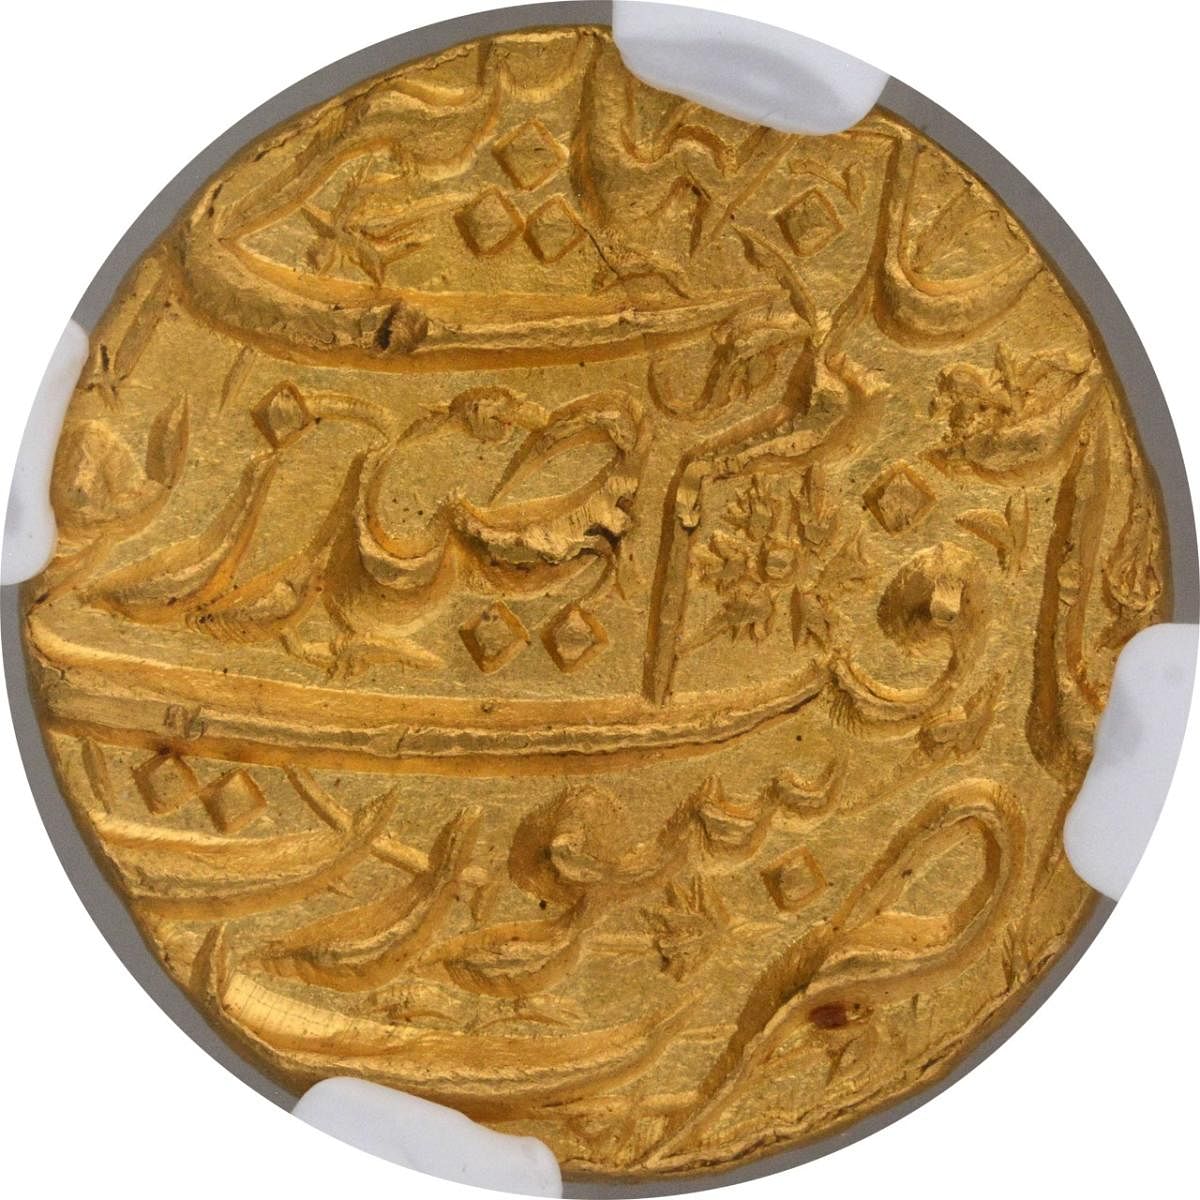 The ‘Noor Jahan coin’ minted during the reign of Mughal emperor Jahangir.